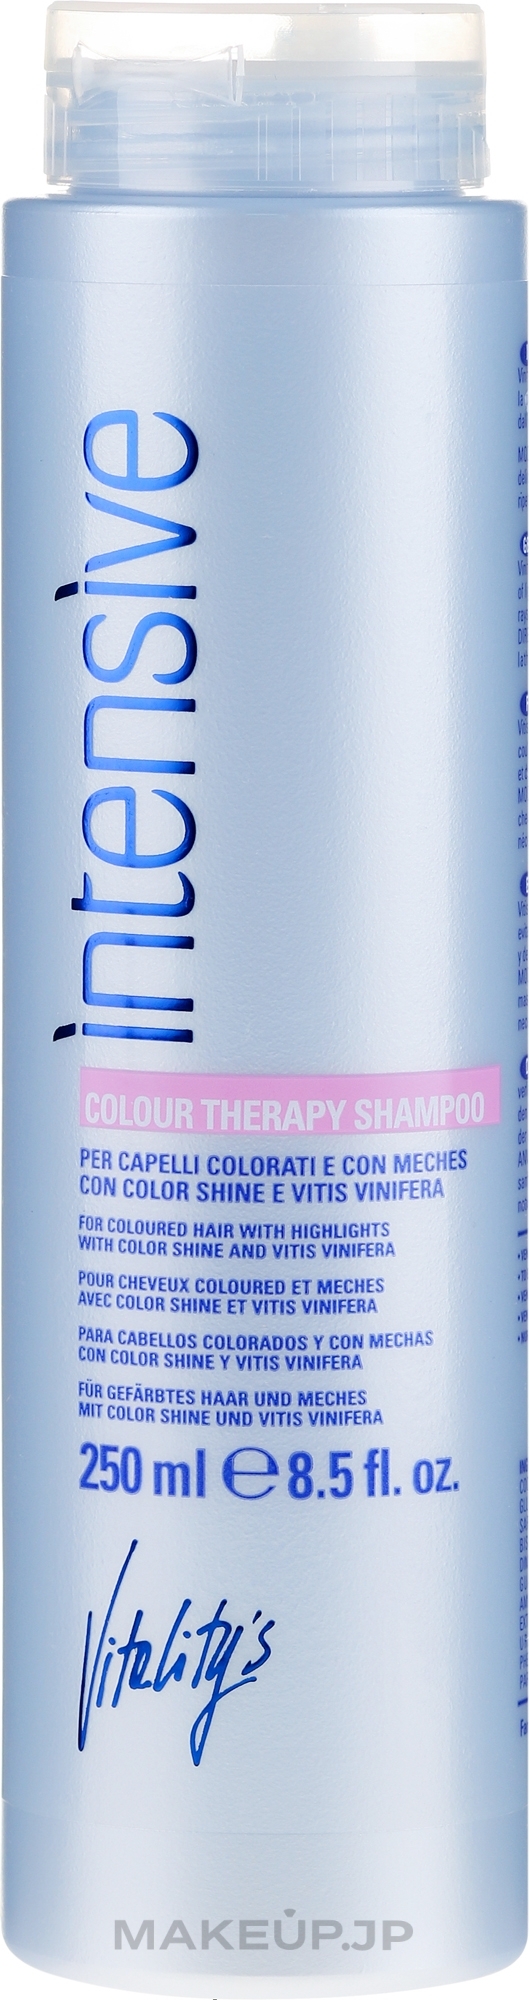 Colored Hair Shampoo - Vitality's Intensive Color Therapy Shampoo — photo 250 ml